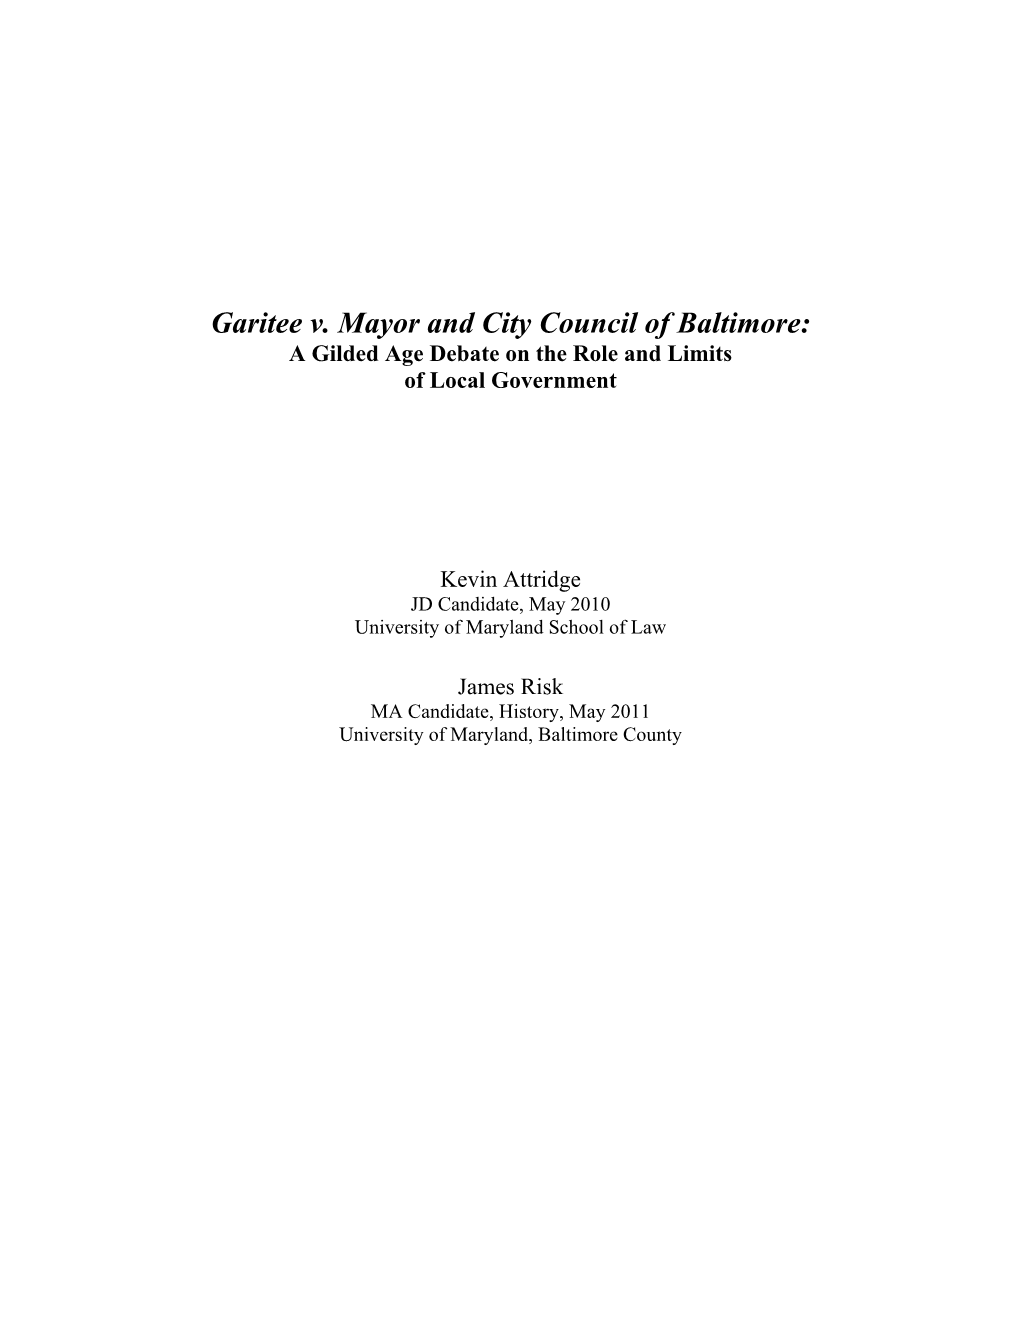 Garitee V. Mayor and City Council of Baltimore: a Gilded Age Debate on the Role and Limits of Local Government